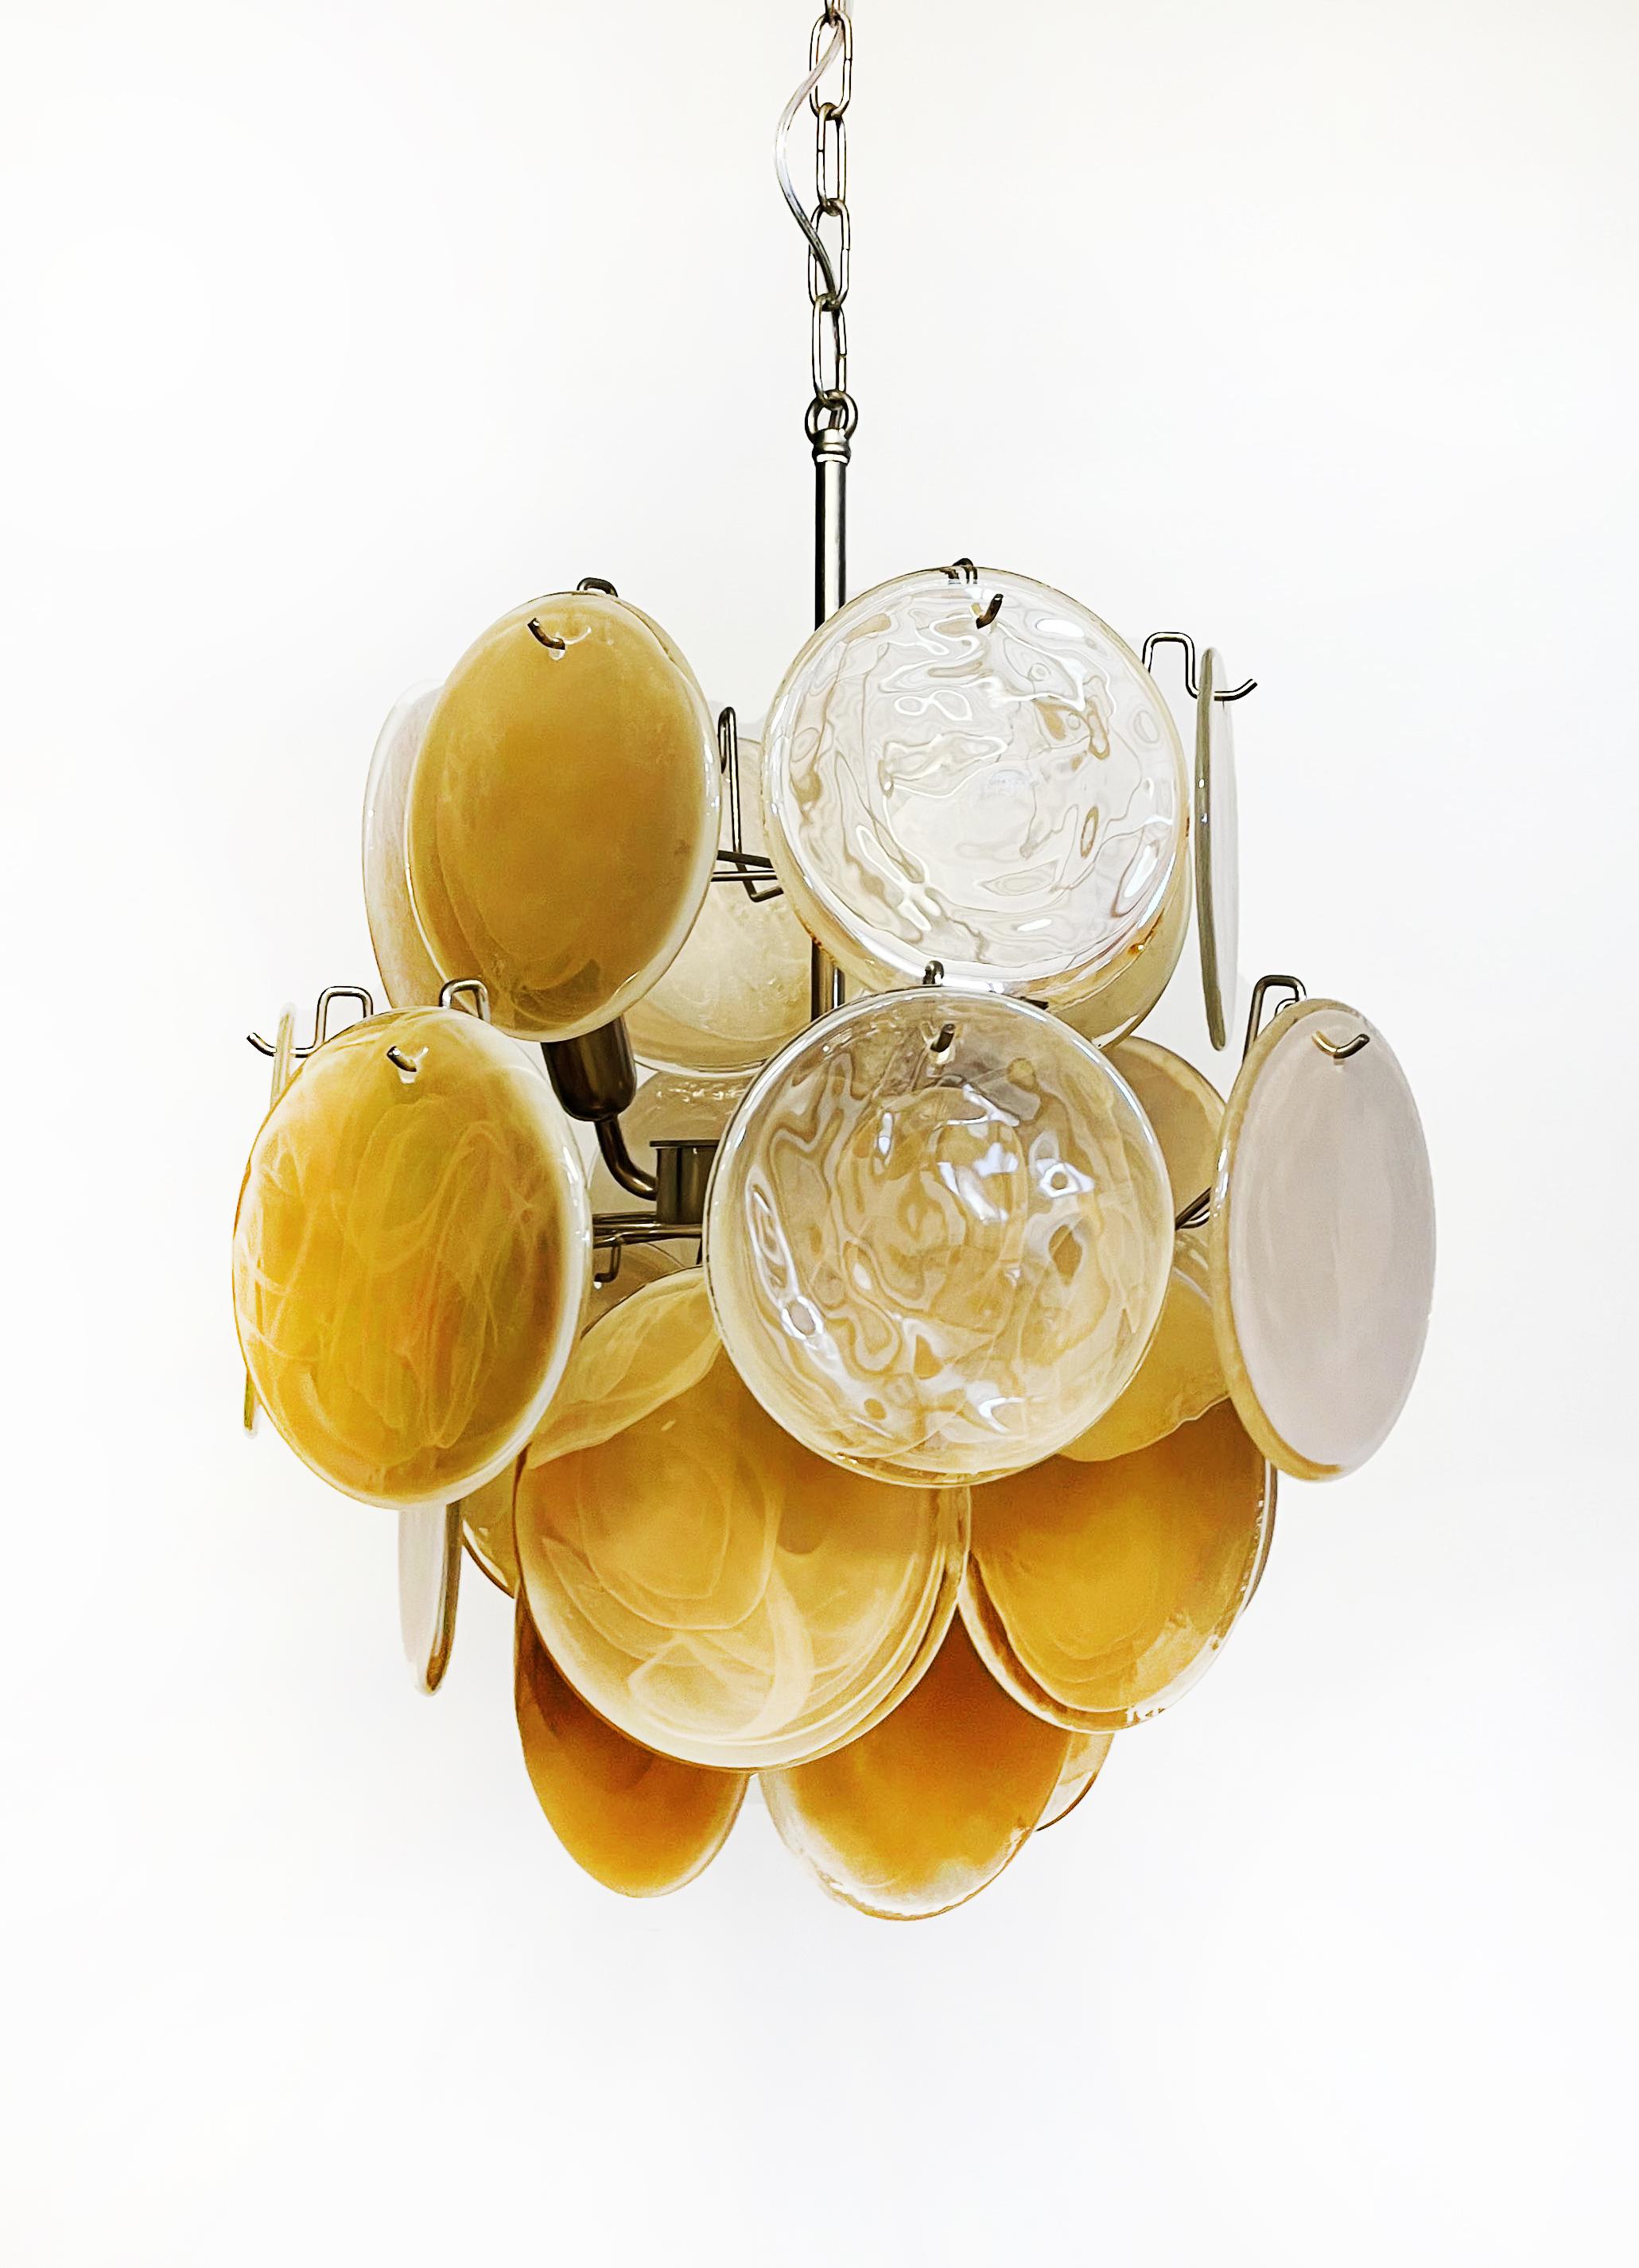 Art Glass 1970s Vintage Italian Murano Chandeliers, 24 Gold Disks For Sale